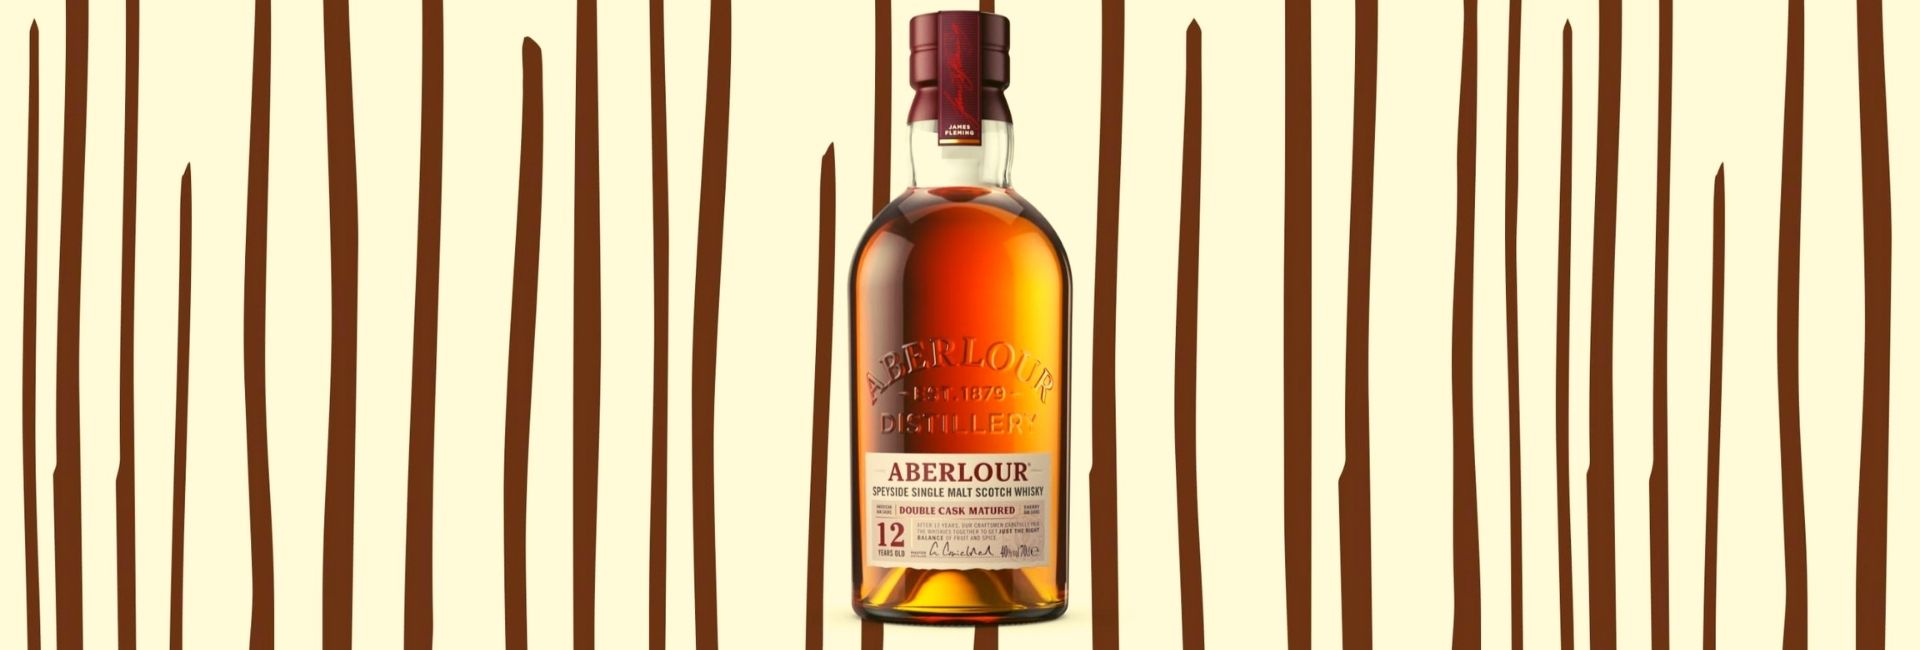 Aberlour 12 Year Old Whisky Review